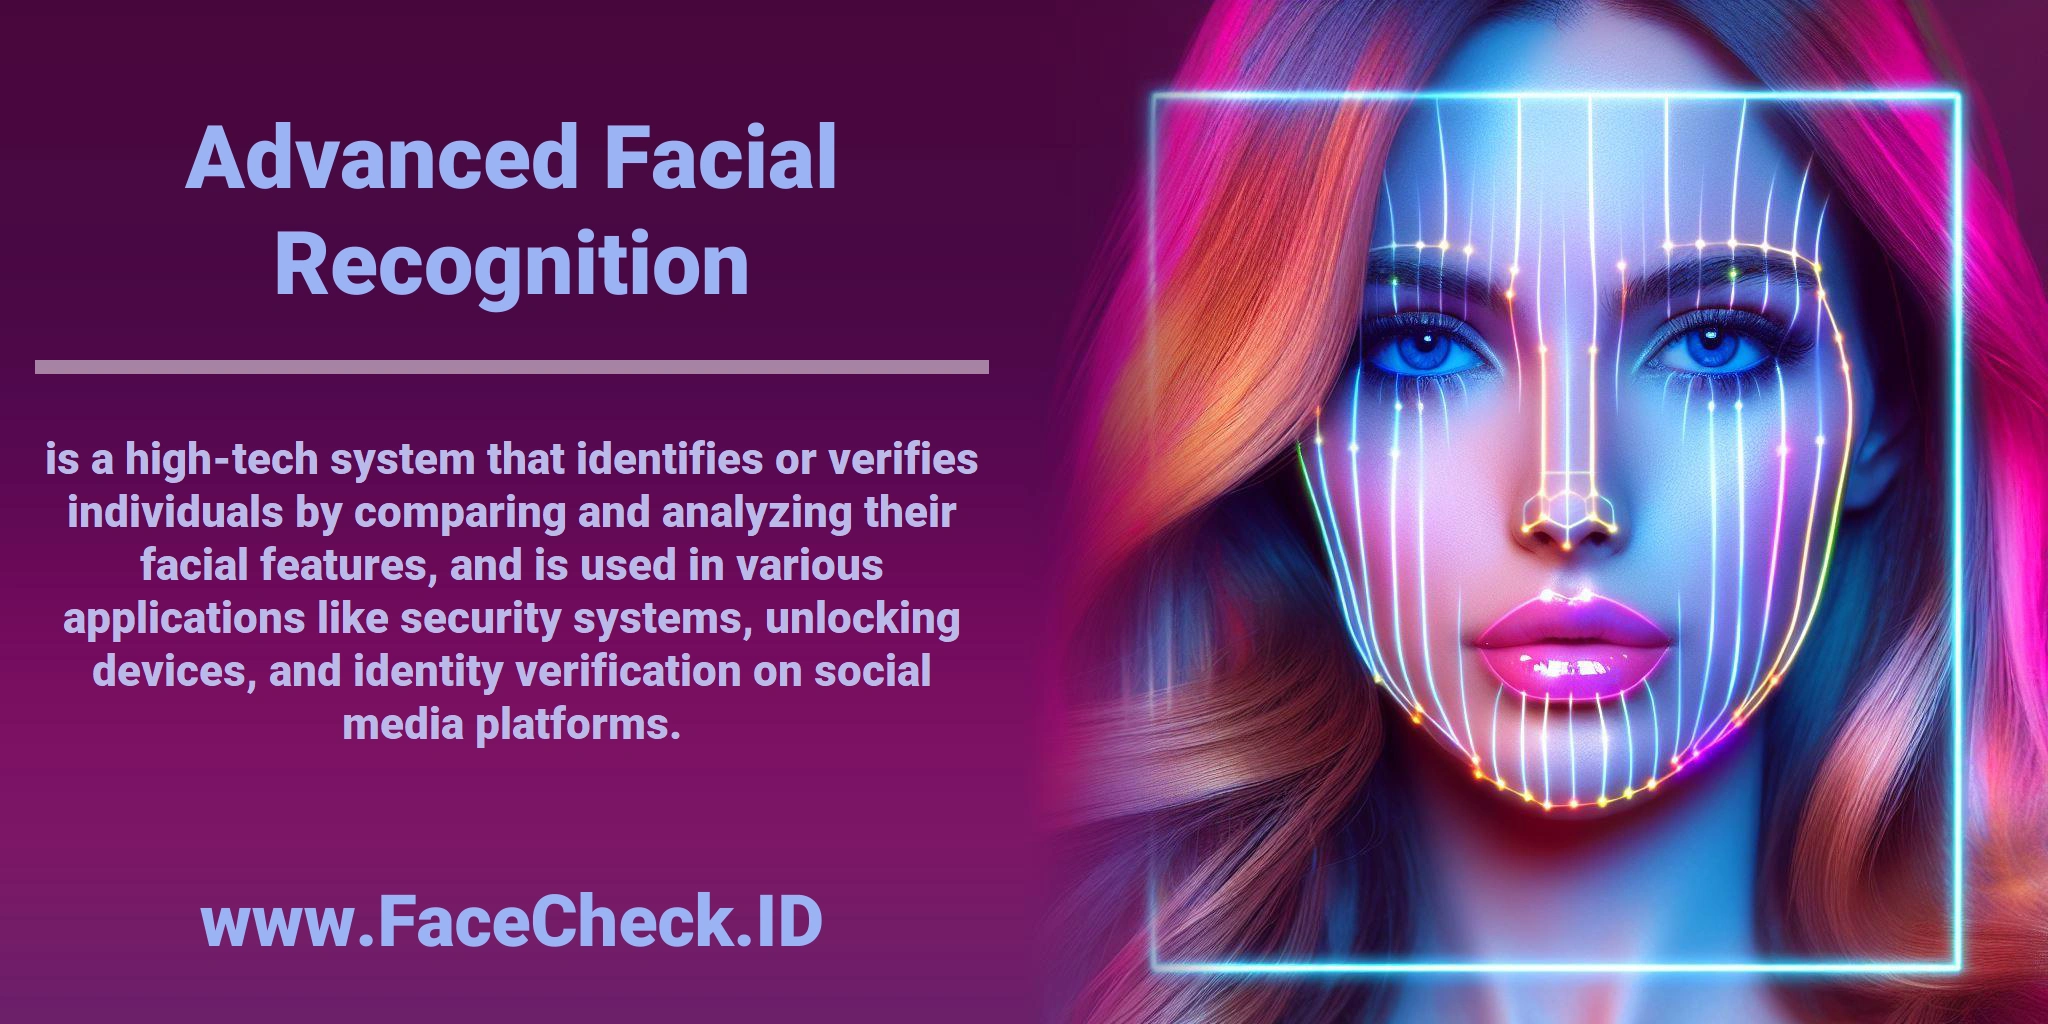 <b>Advanced Facial Recognition</b> is a high-tech system that identifies or verifies individuals by comparing and analyzing their facial features, and is used in various applications like security systems, unlocking devices, and identity verification on social media platforms.